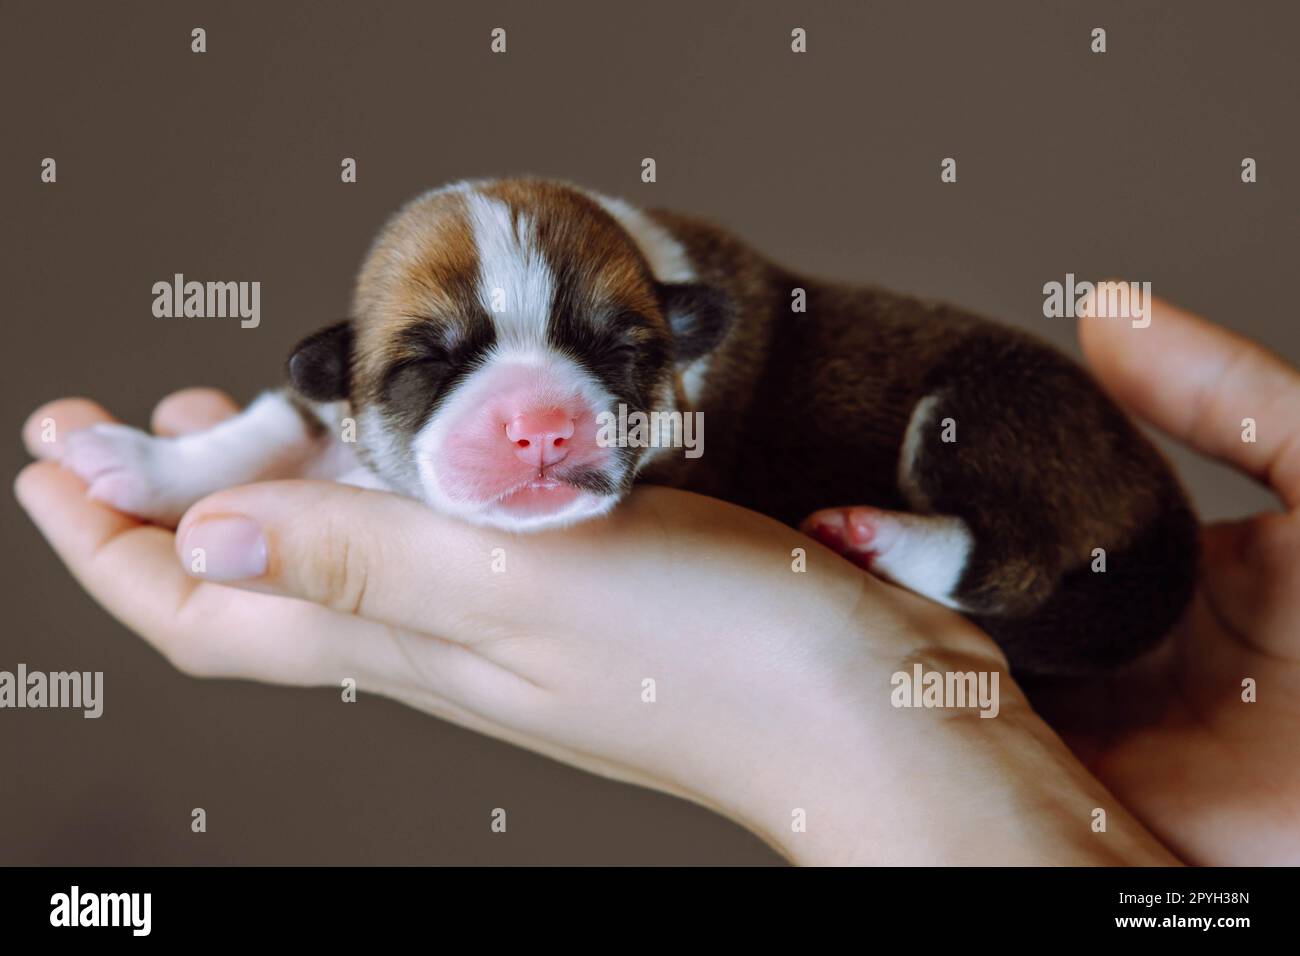 Side view of sweet two-month-old puppy of dog pembroke welsh corgi sleeping resting on hands of unrecognizable woman. Stock Photo